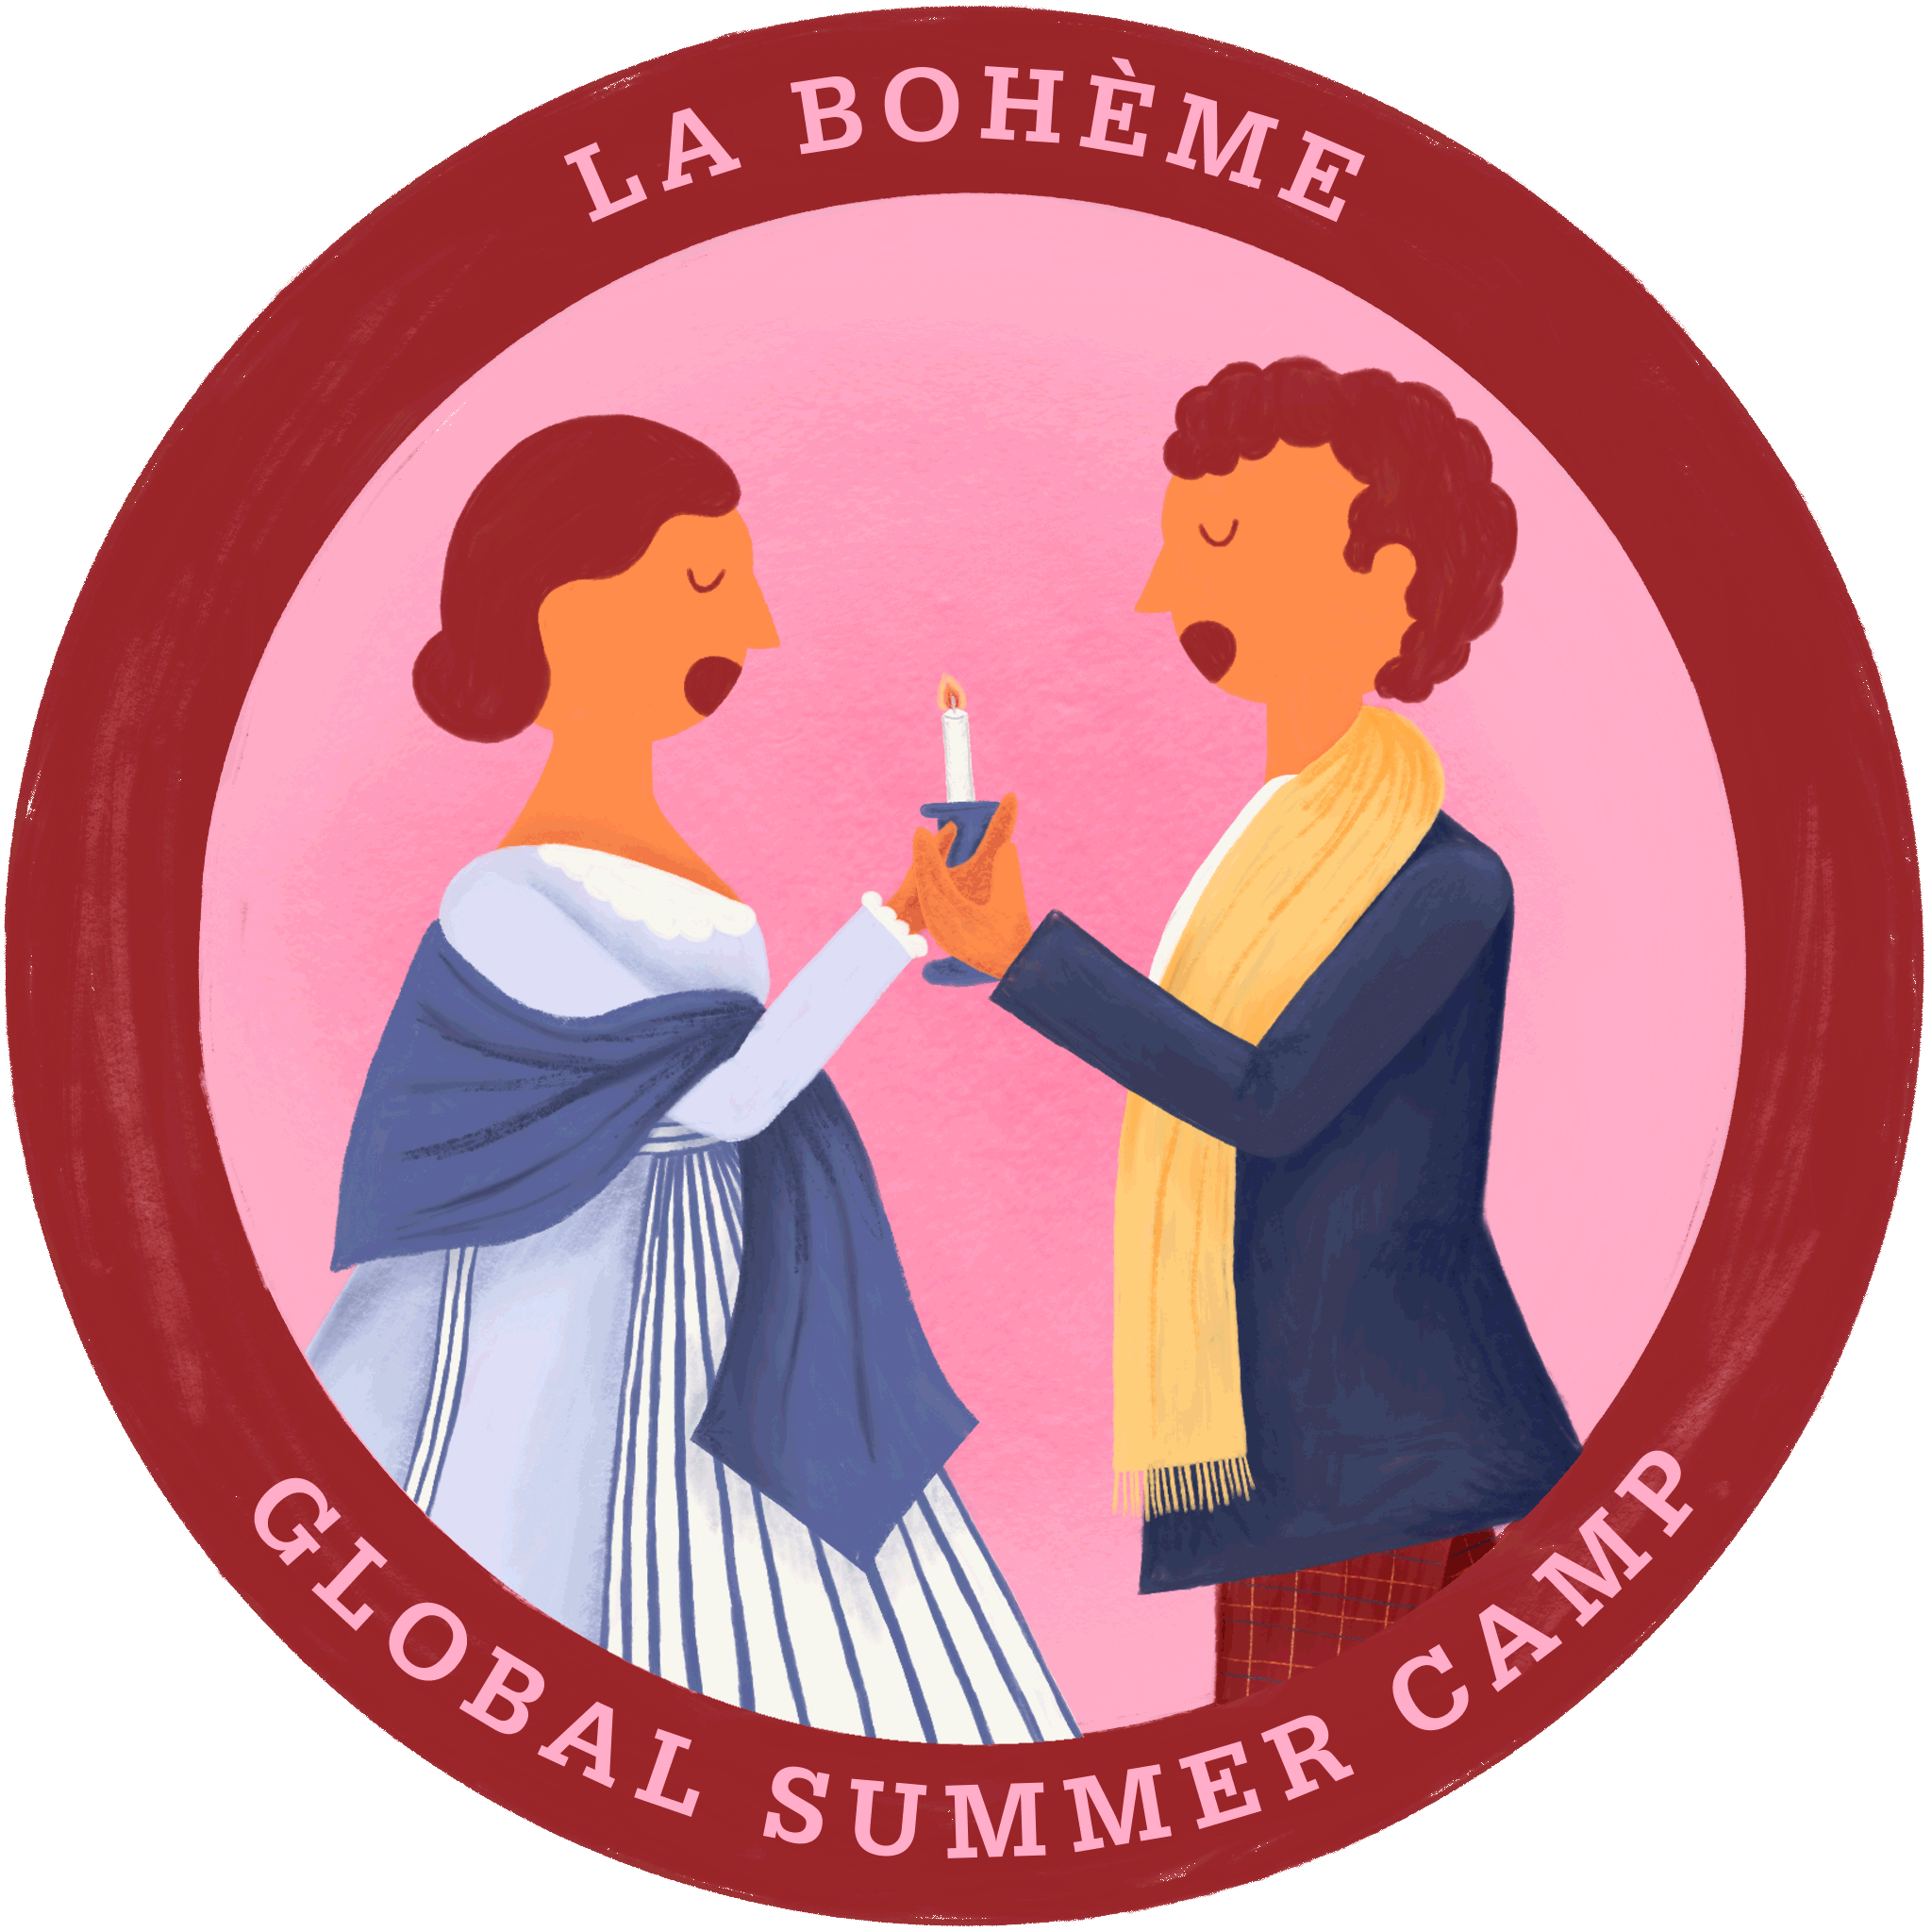 A circular badge with an illustration of a man and woman holding a candle together with the words "La Boheme" and "Global Summer Camp" on the border